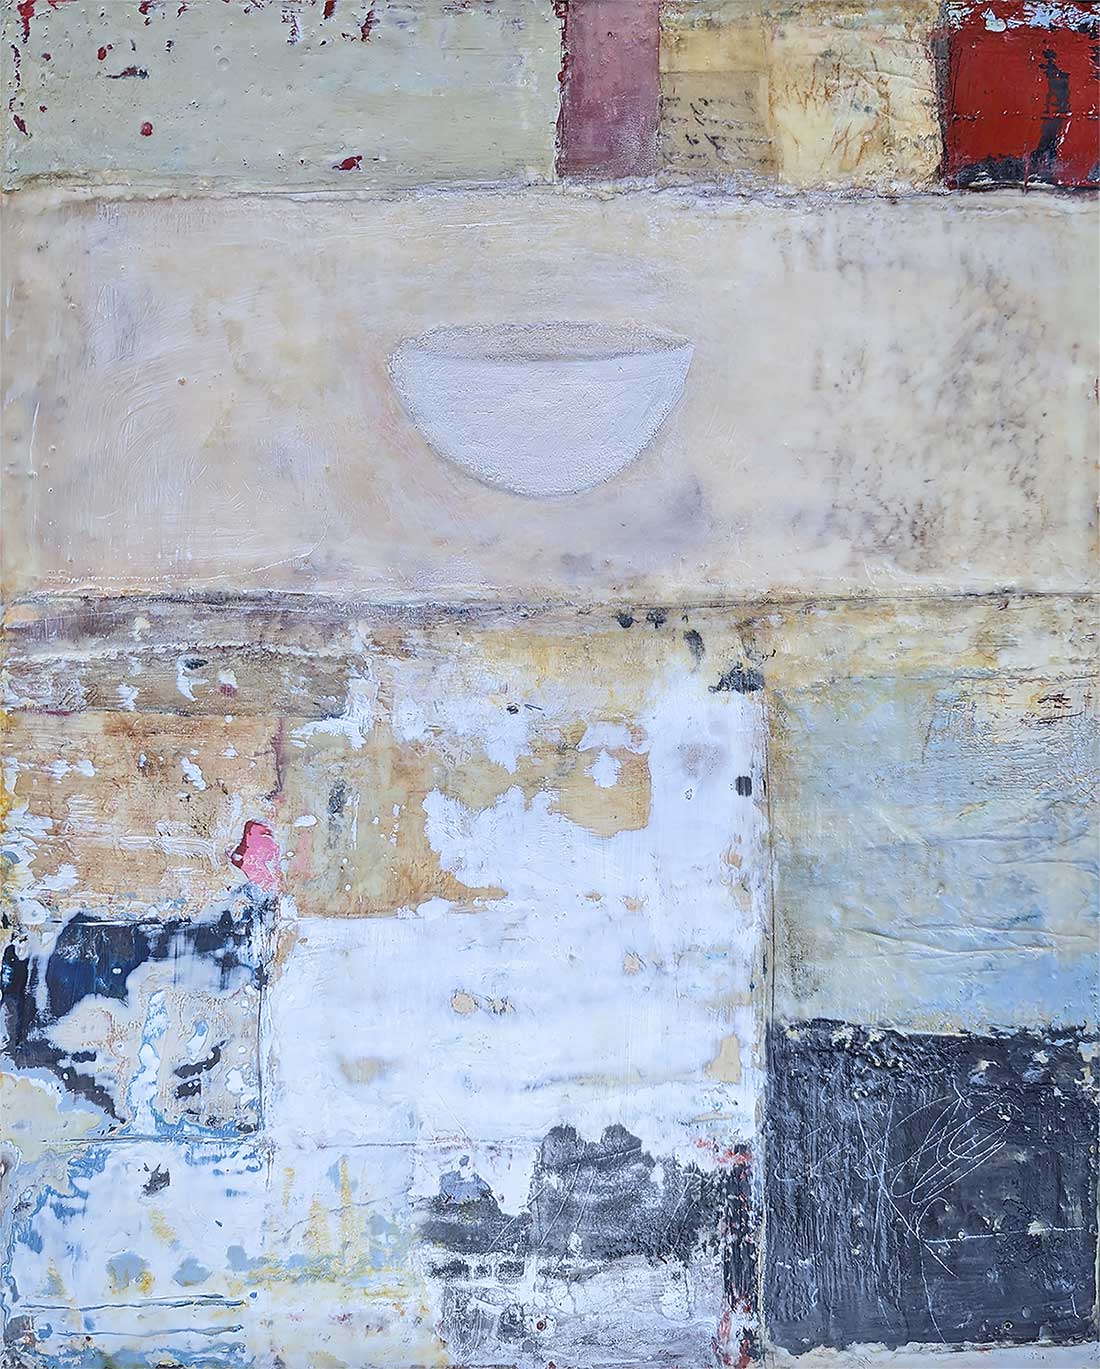 encaustic mixed media painting, What Was Left of Scattered Belongings, by Bridgette Guerzon Mills